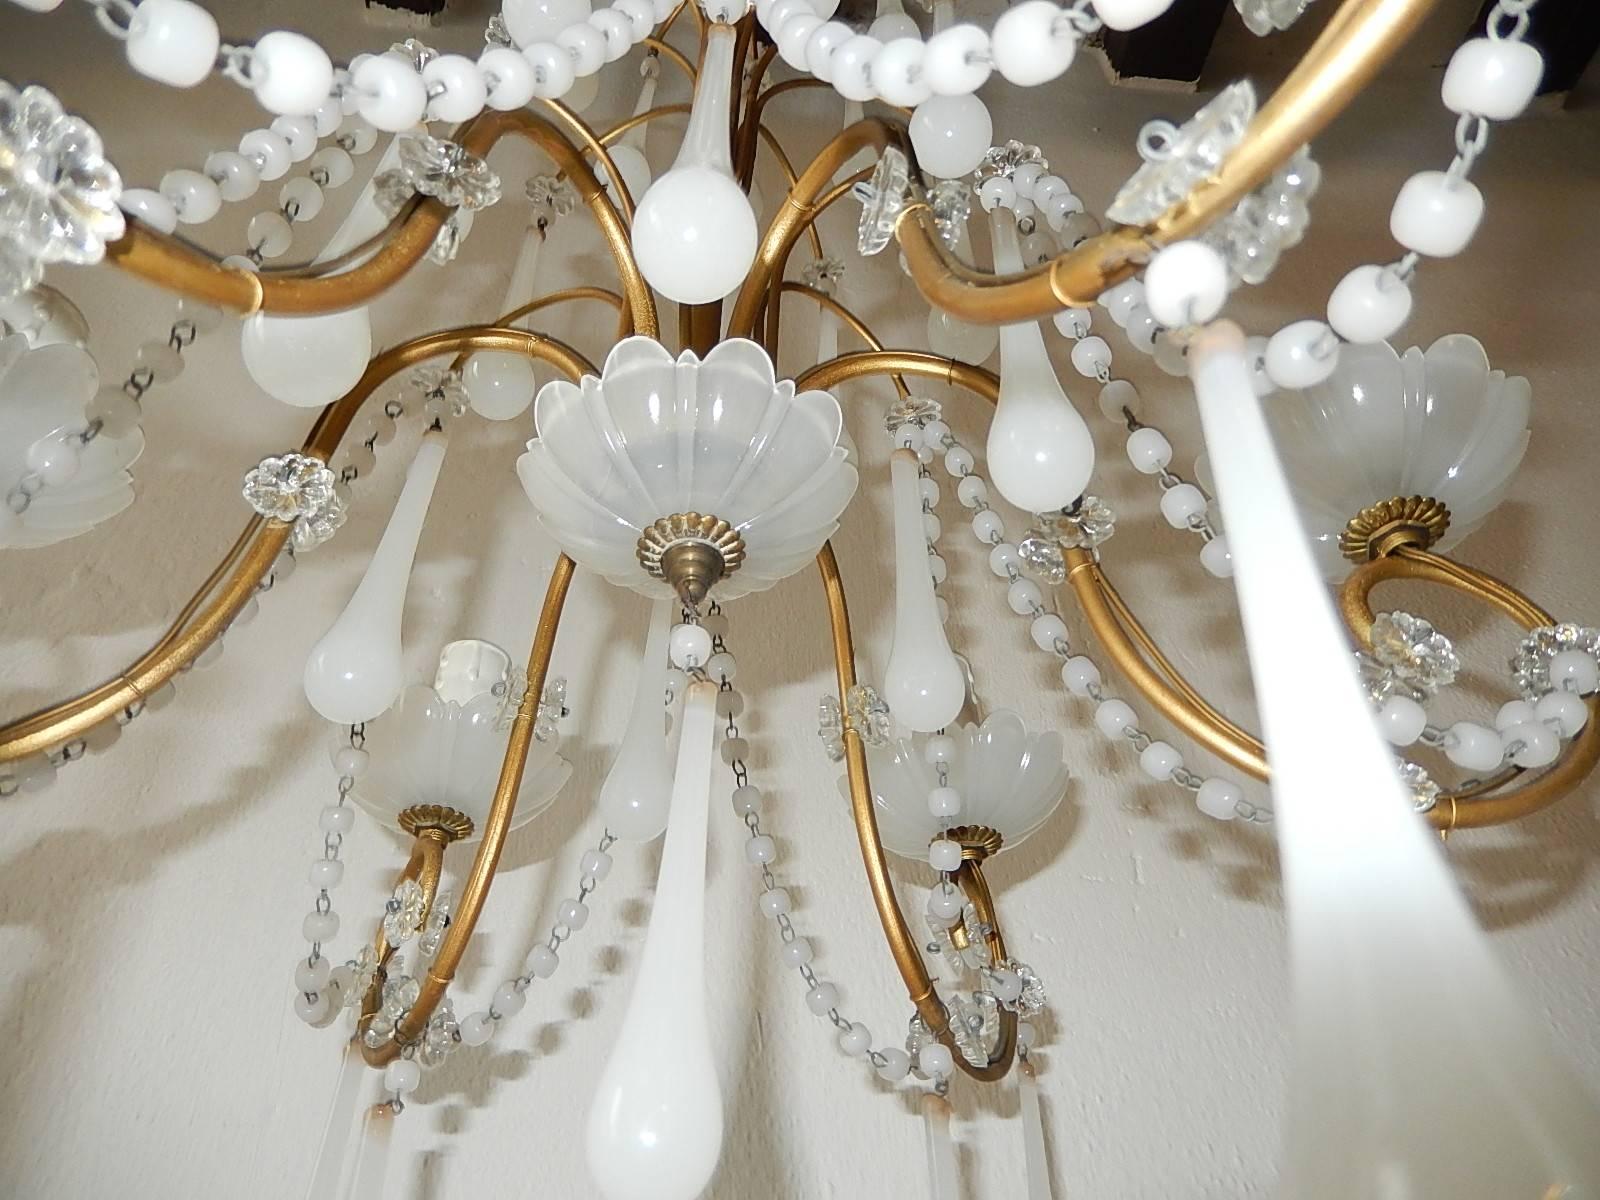 1930 French White Opaline Bobeches, Beads and Drops Chandelier 3